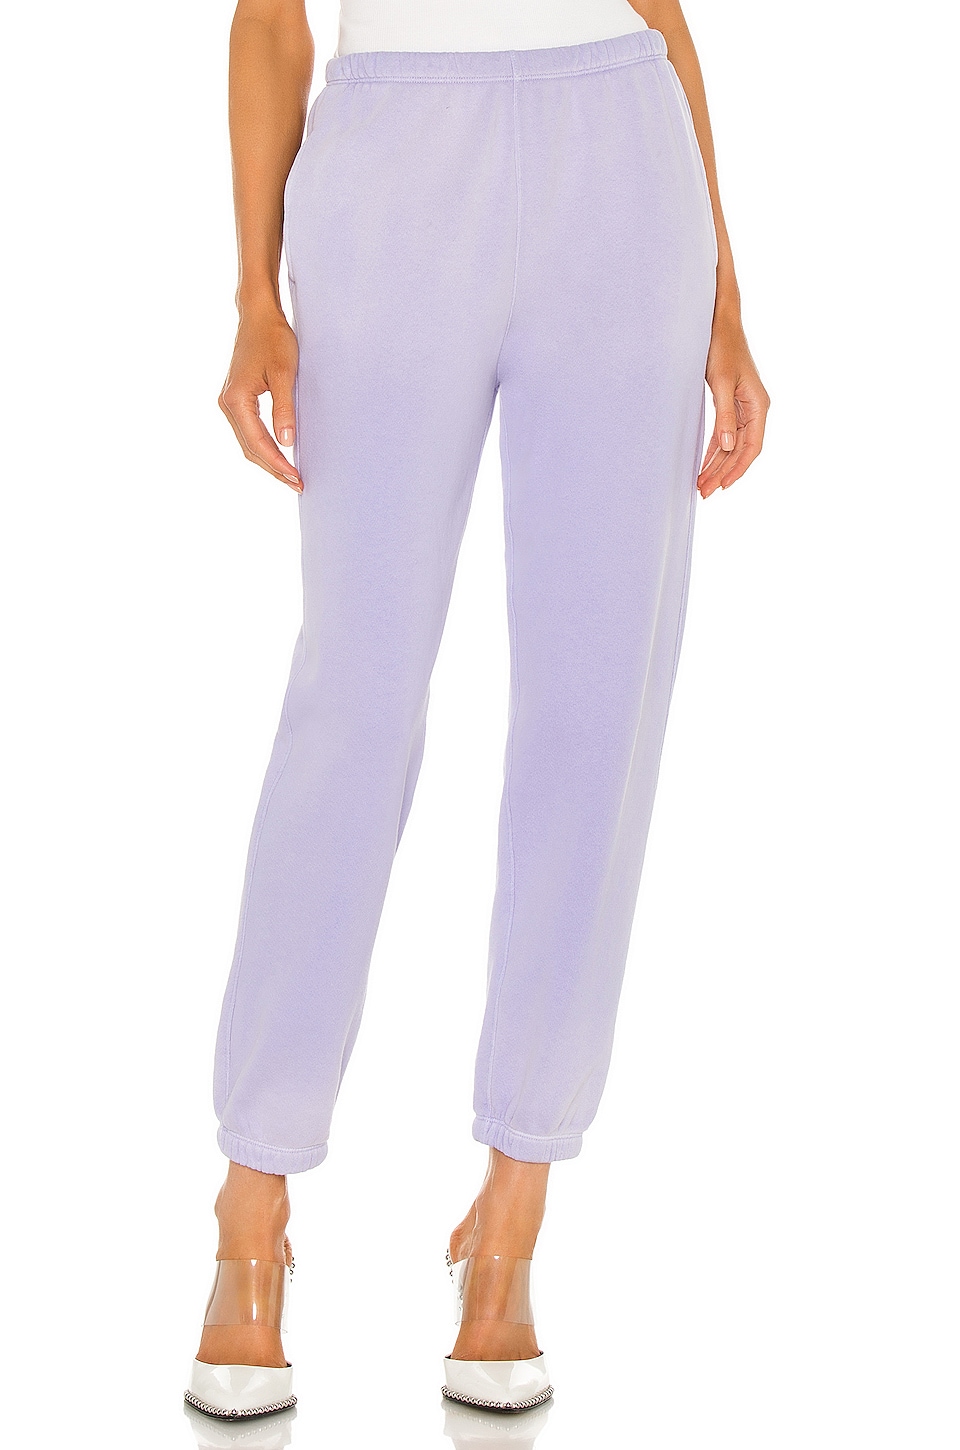 RE/DONE Originals 80s Sweatpant Faded Orchid